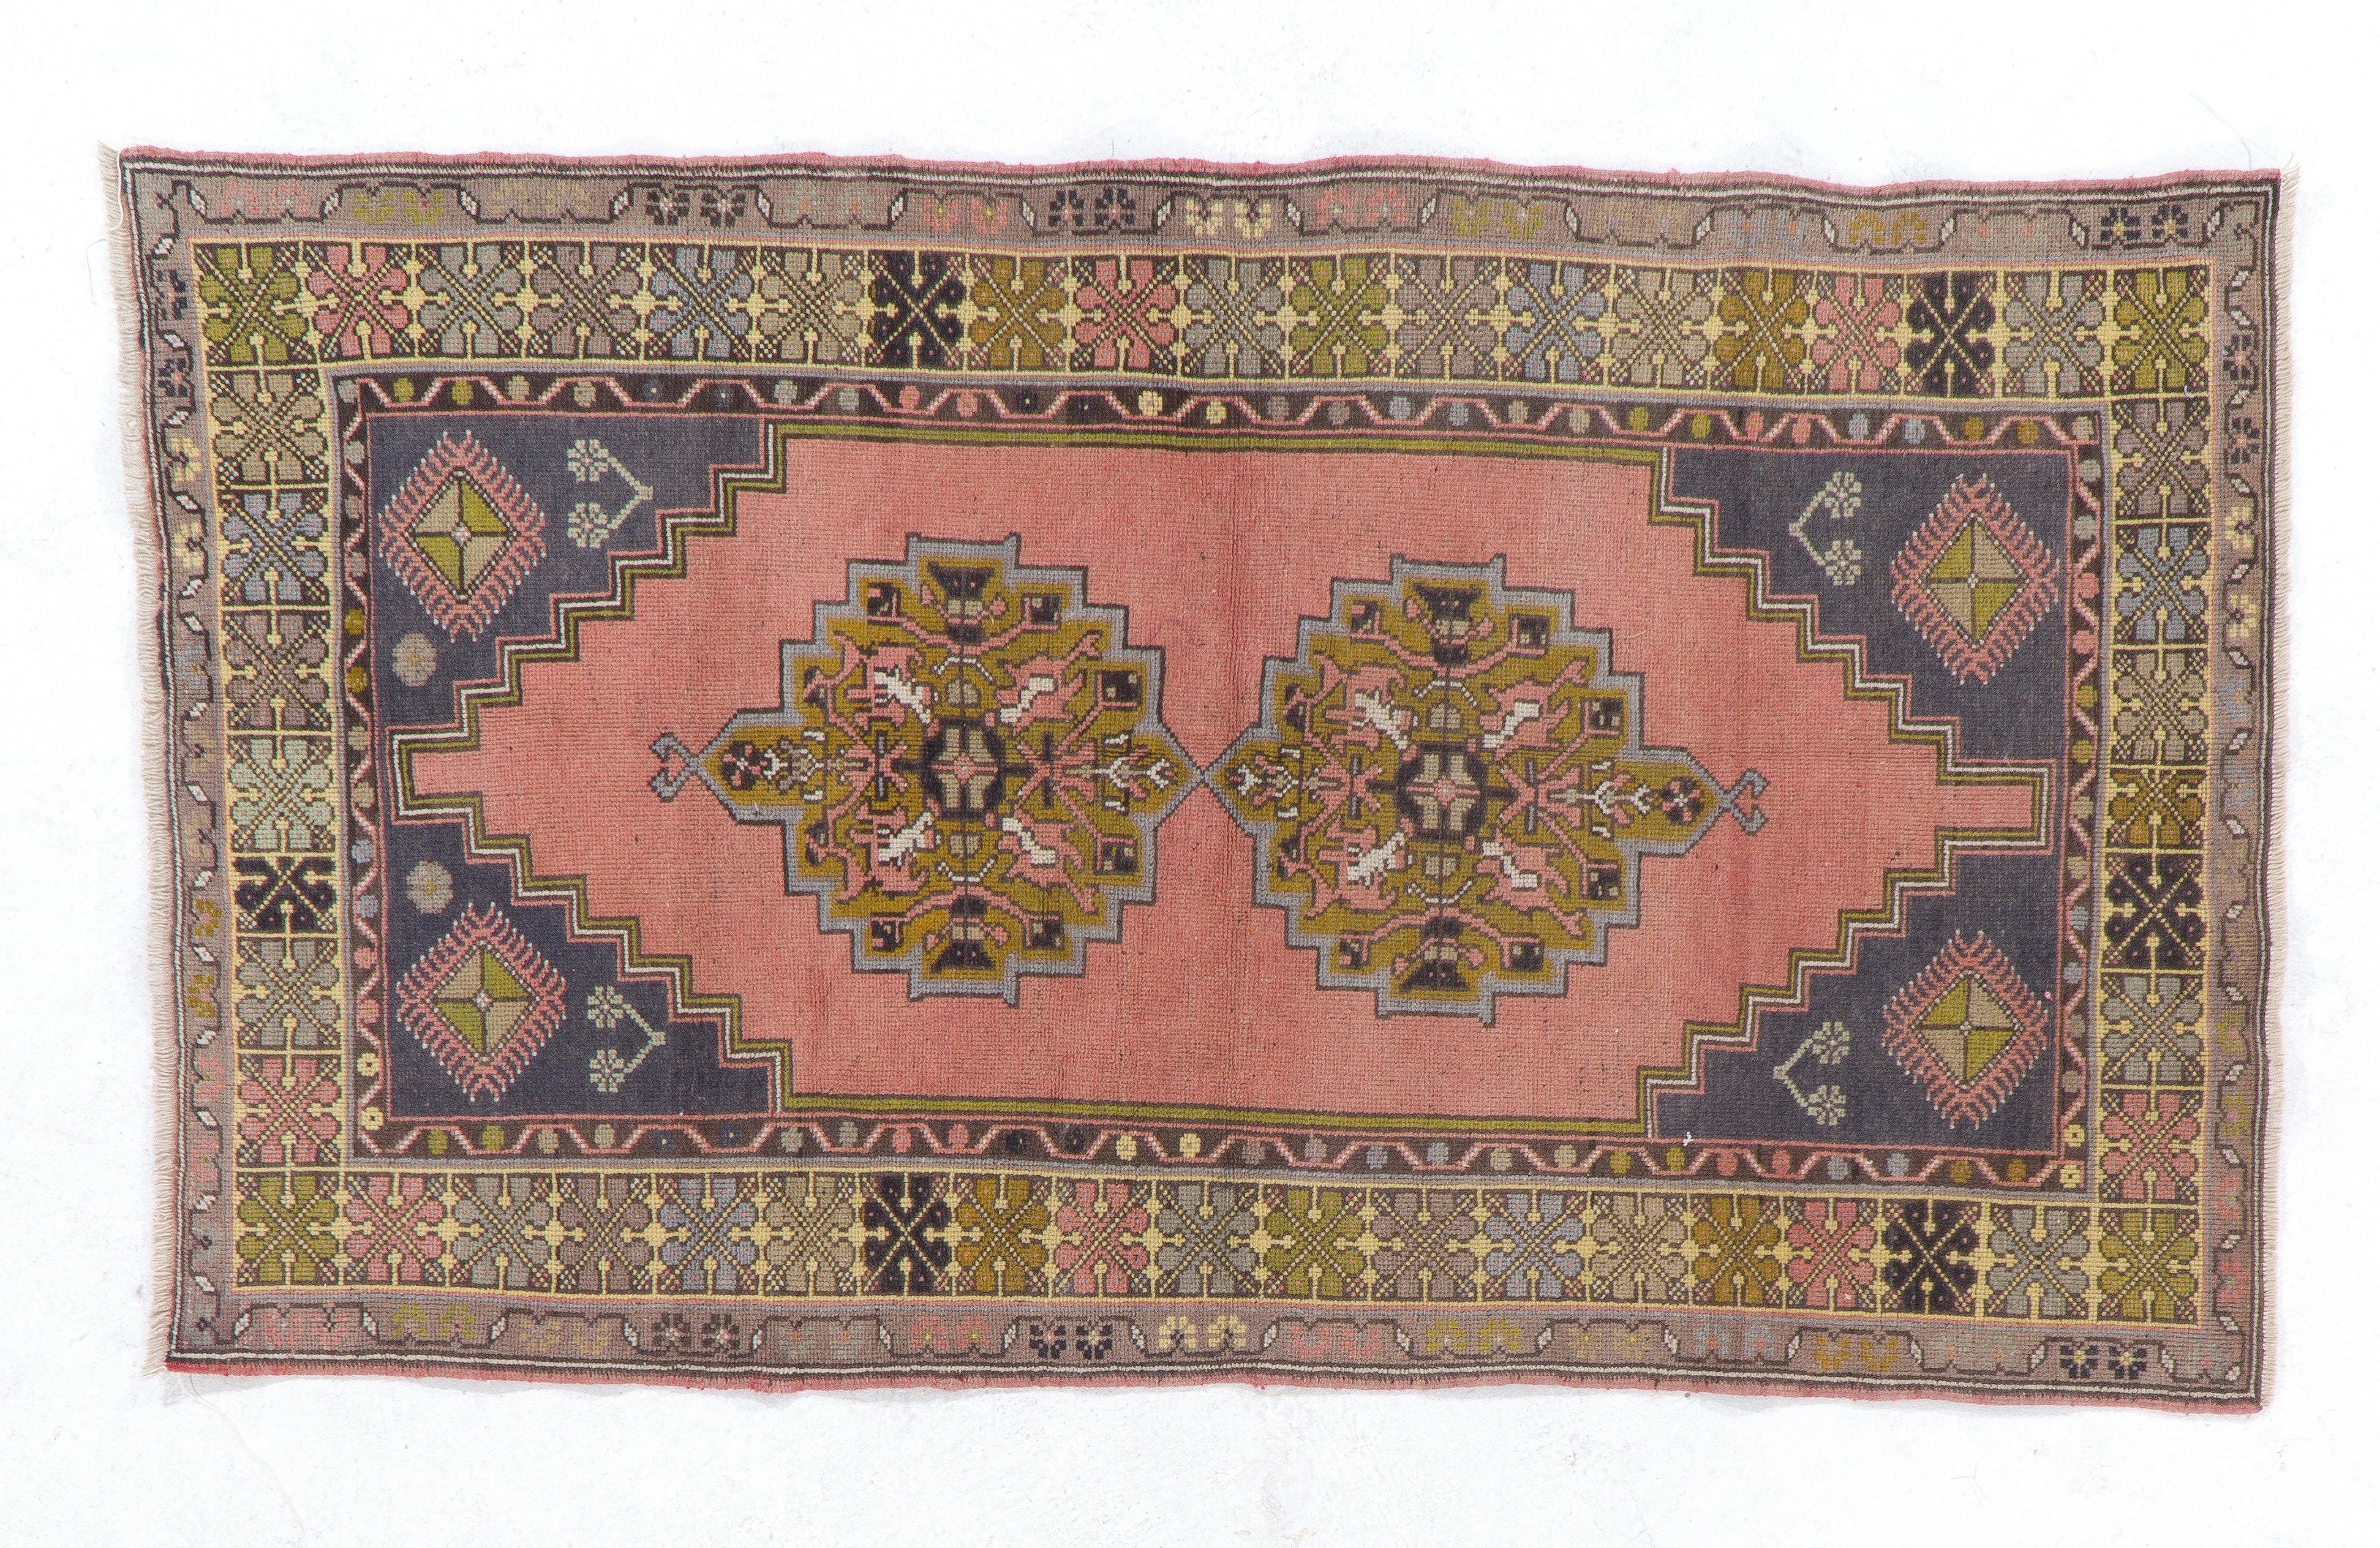 A one of a kind midcentury Turkish rug in well preserved condition.
The rug is hand knotted with natural sheep's wool, has soft medium pile. It is finely woven, very sturdy and suitable for both residential and commercial interiors and high foot